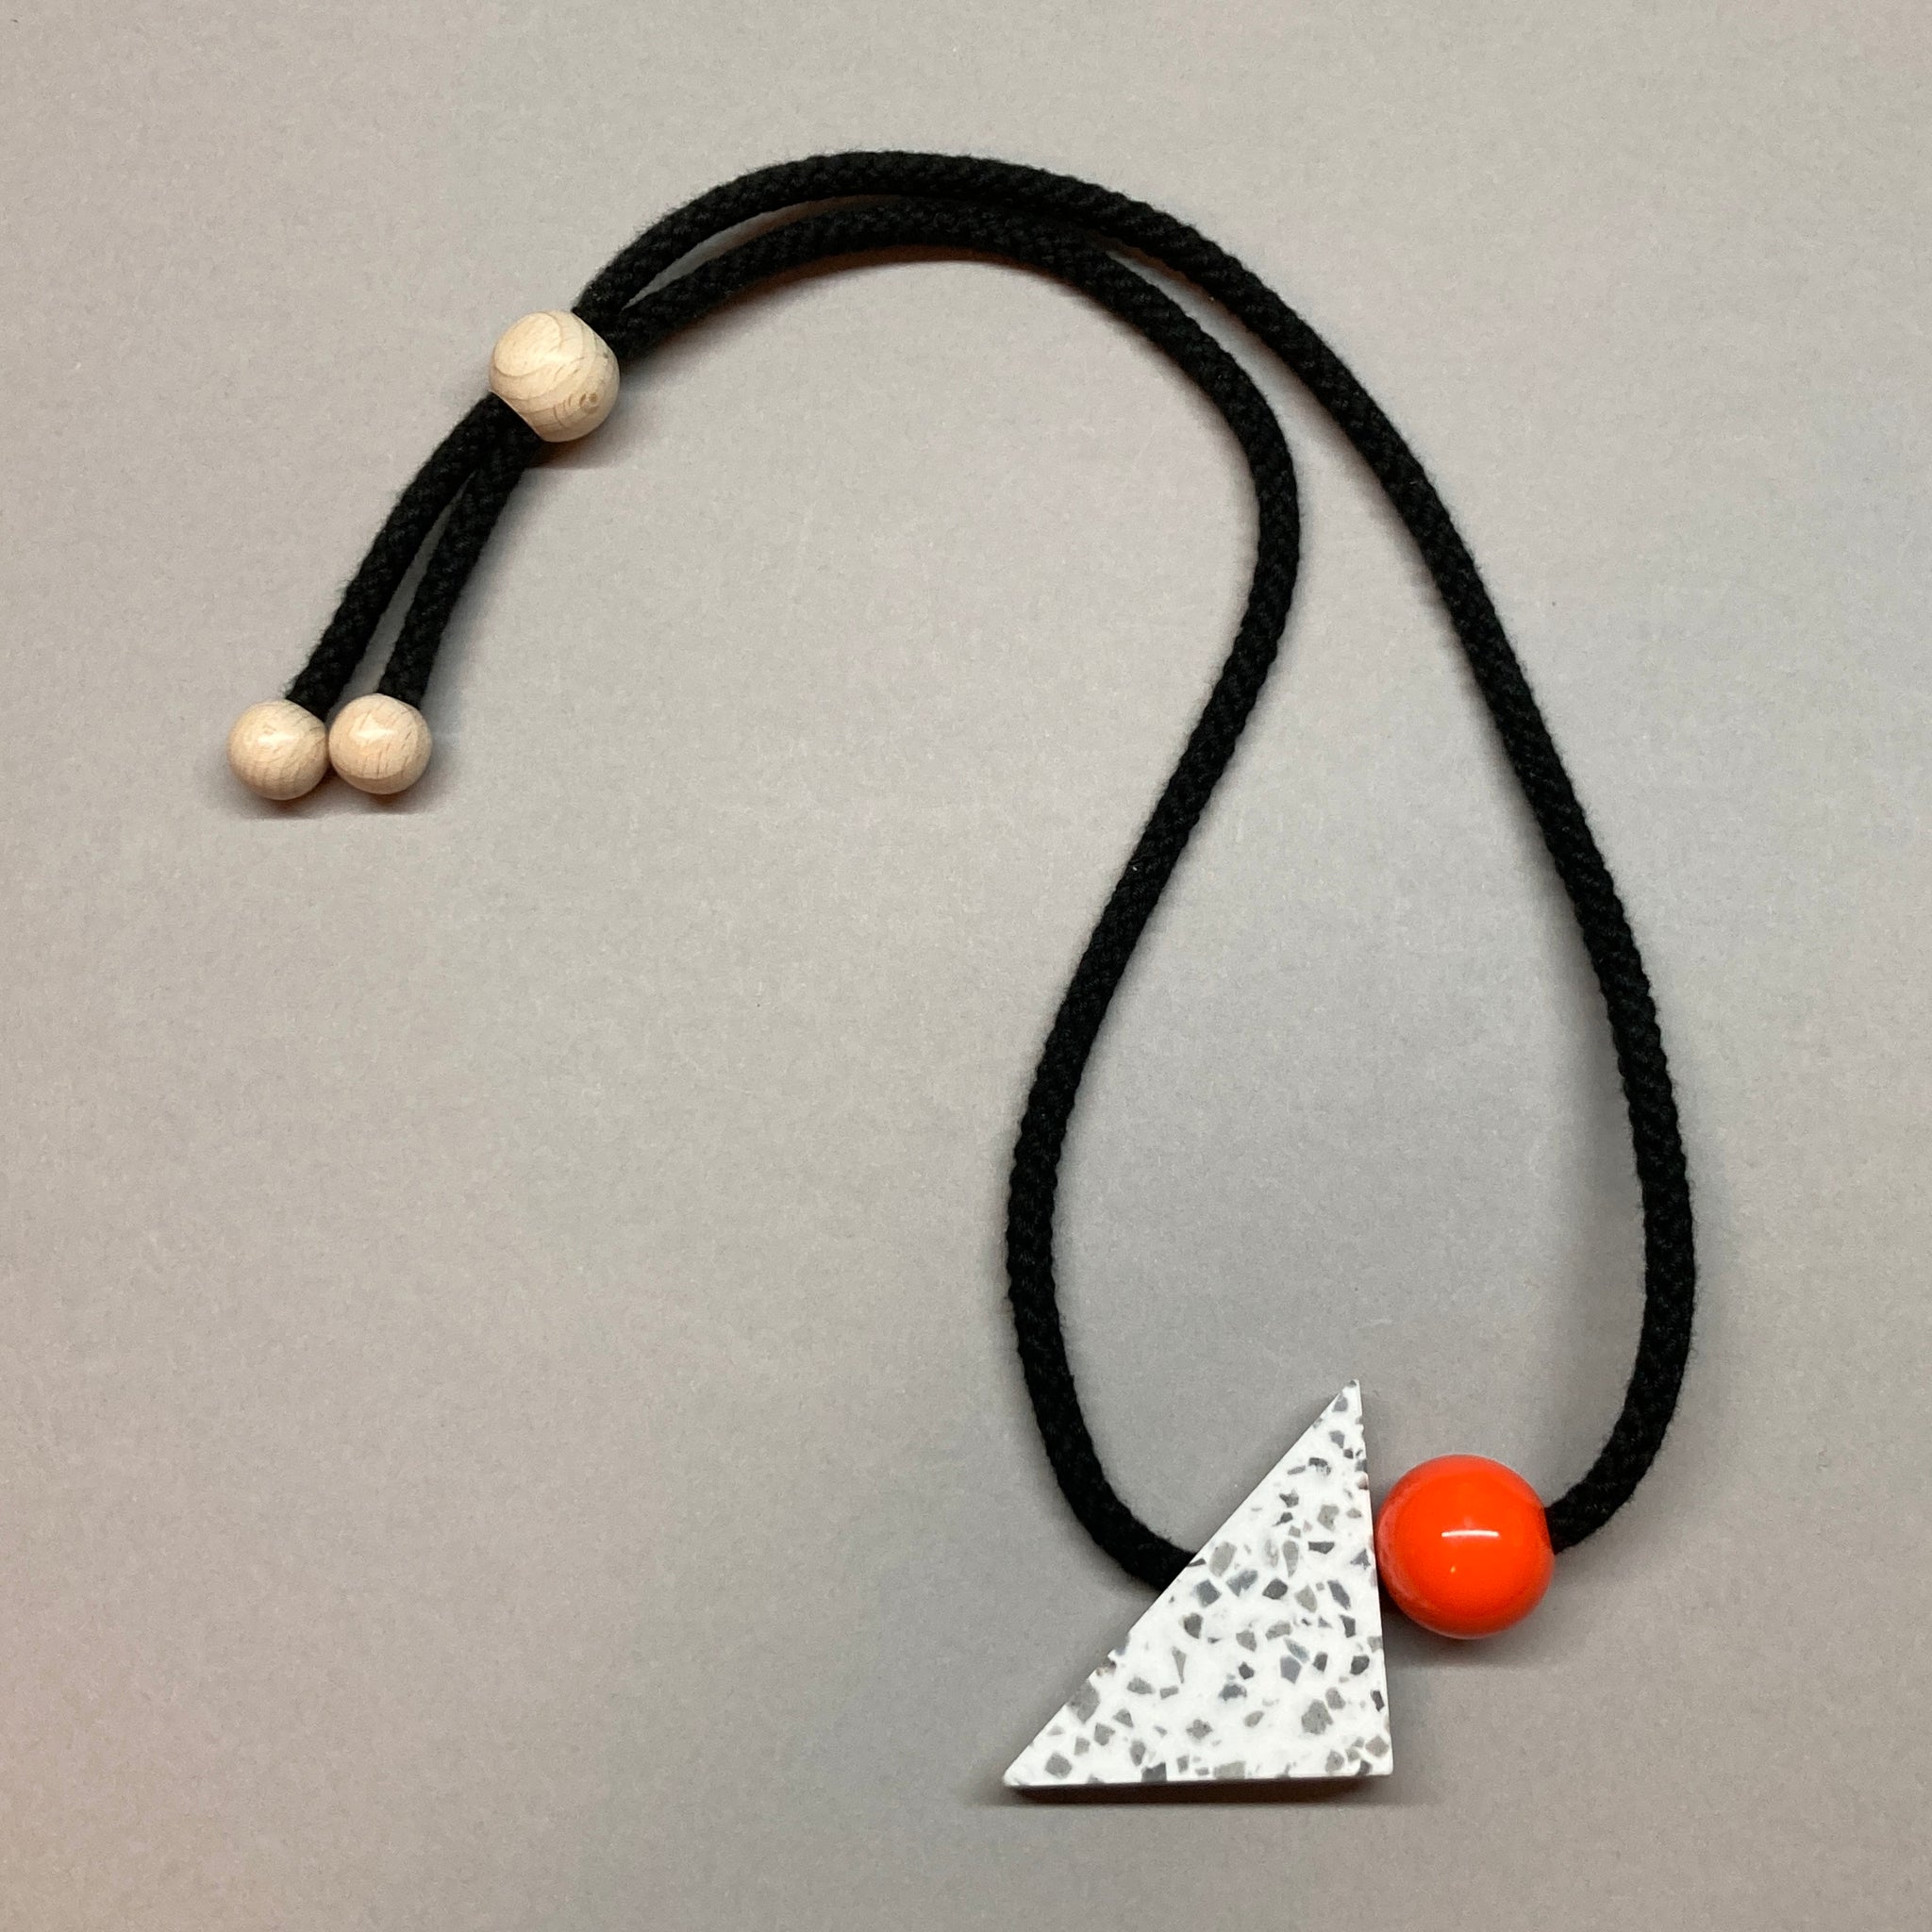 One-off White/grey speckle necklace